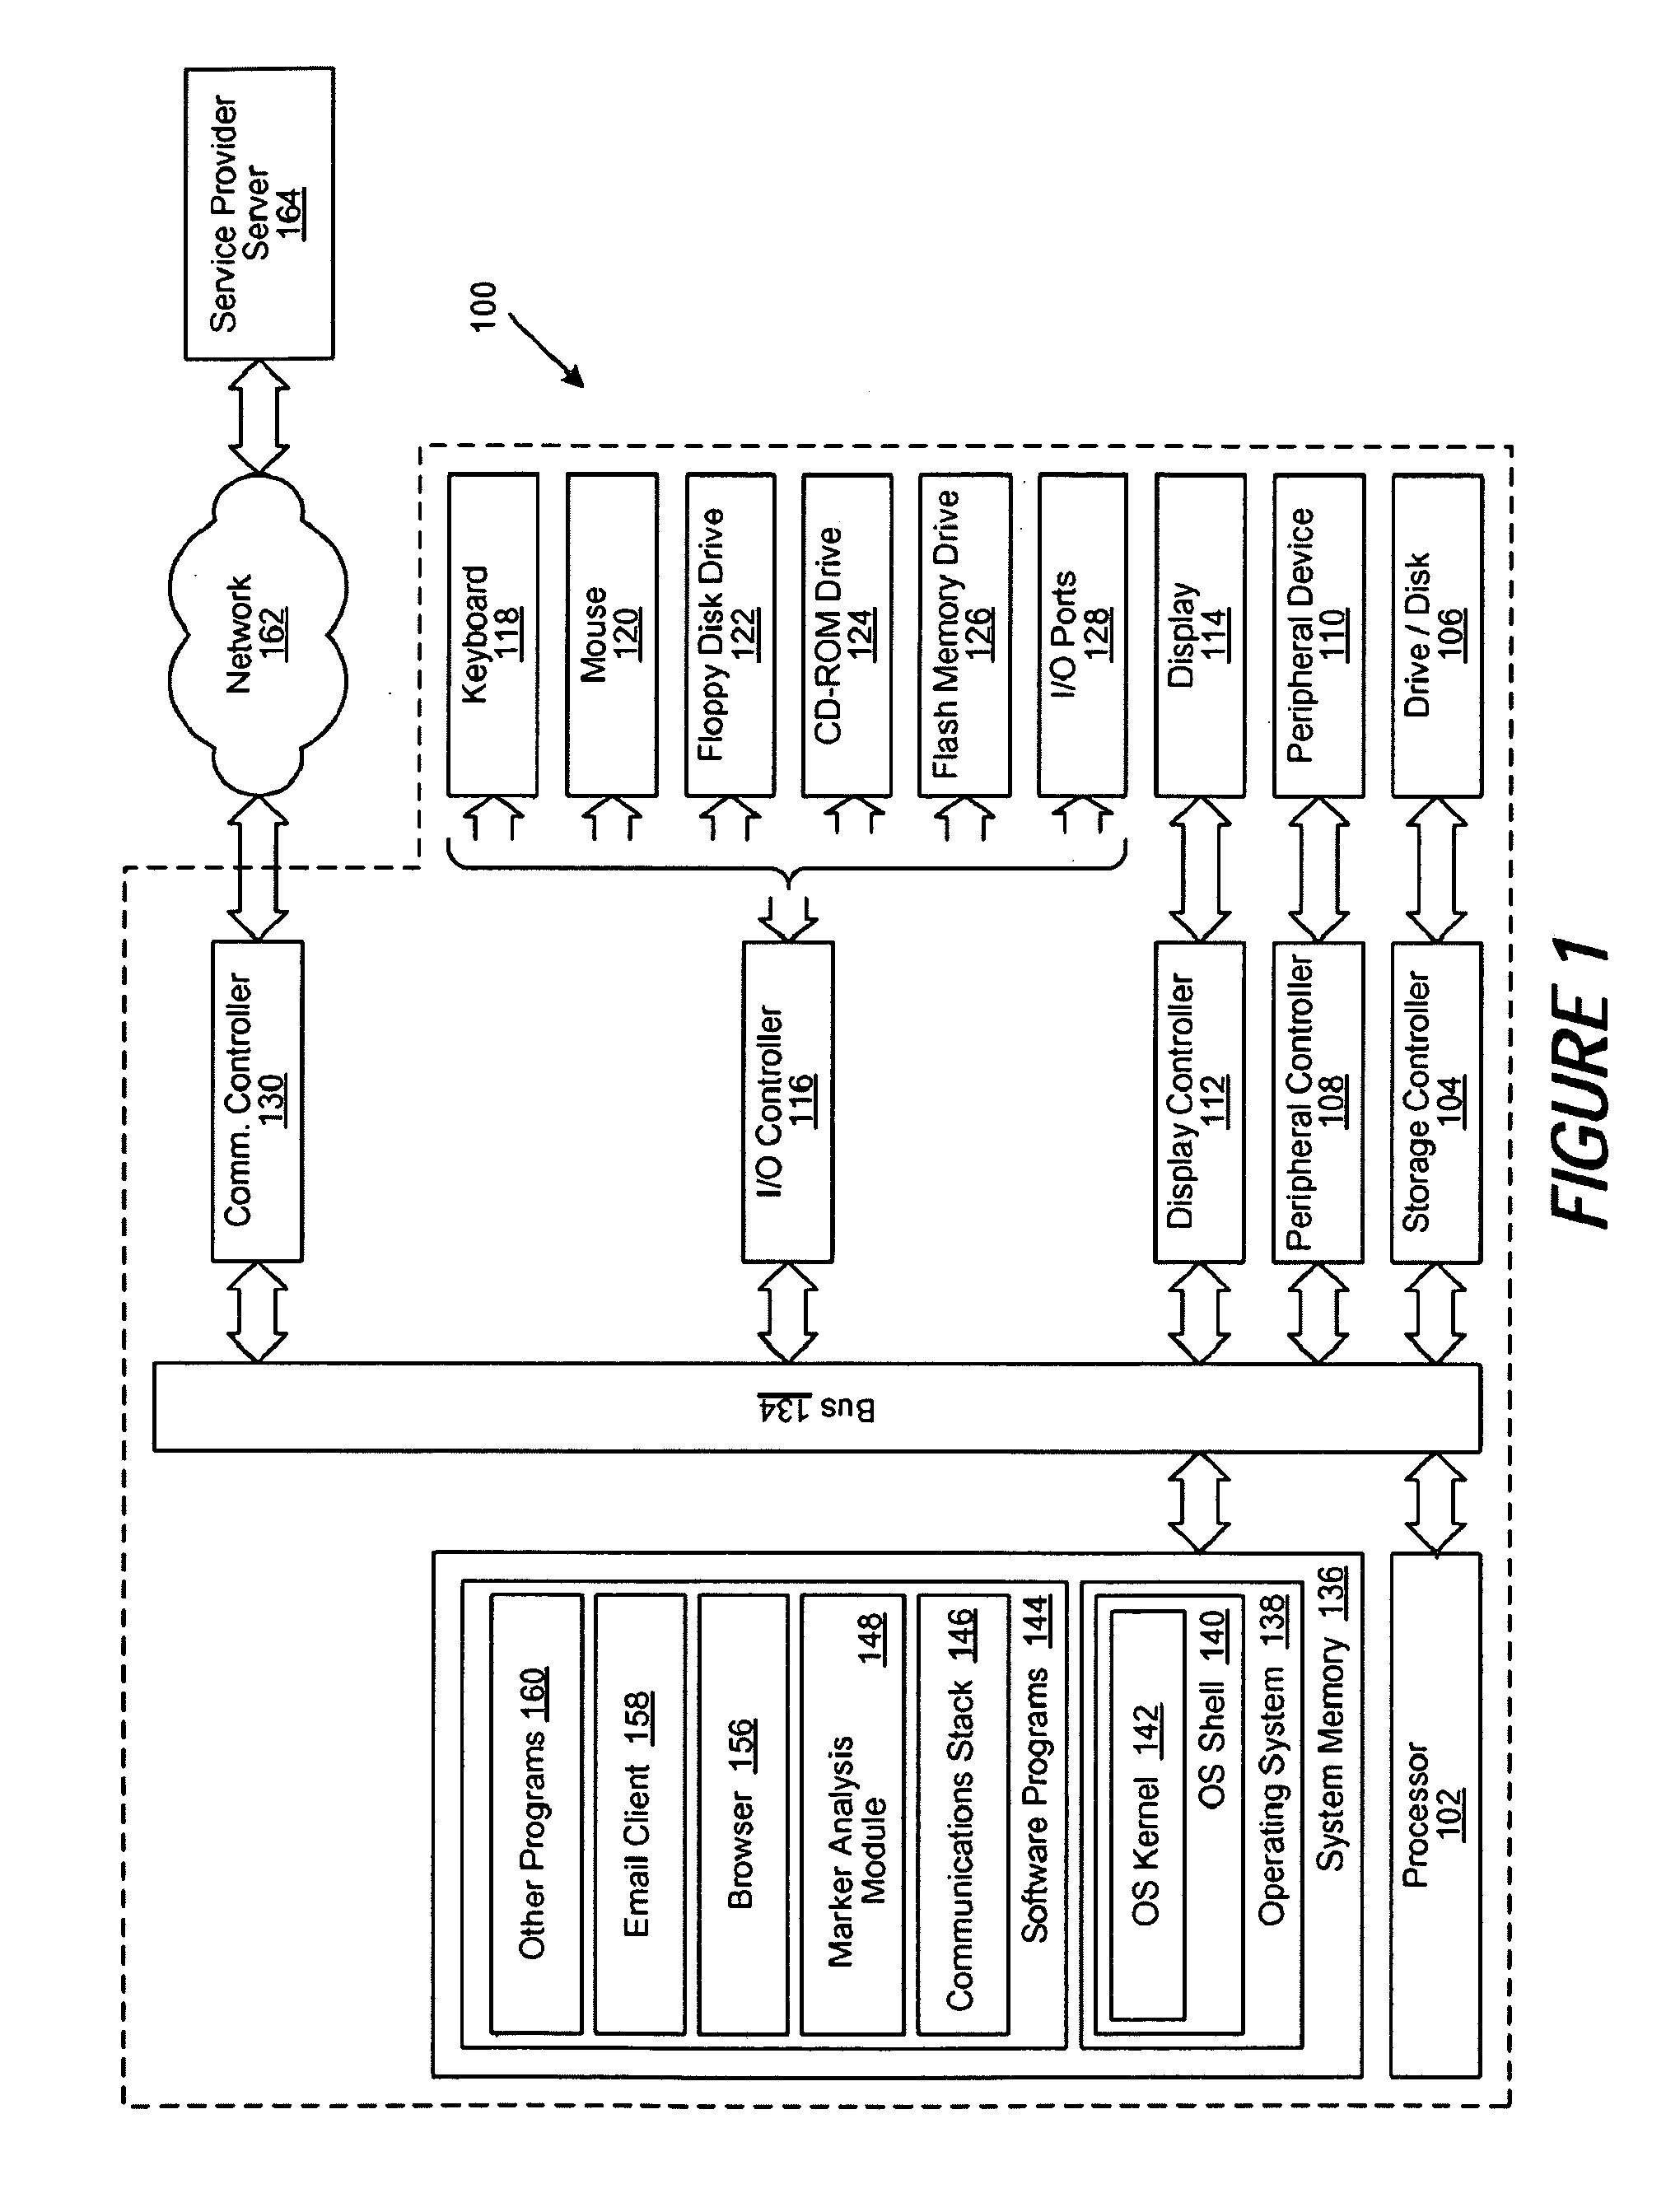 Systems and methods for hit and run detection based on intelligent micro devices